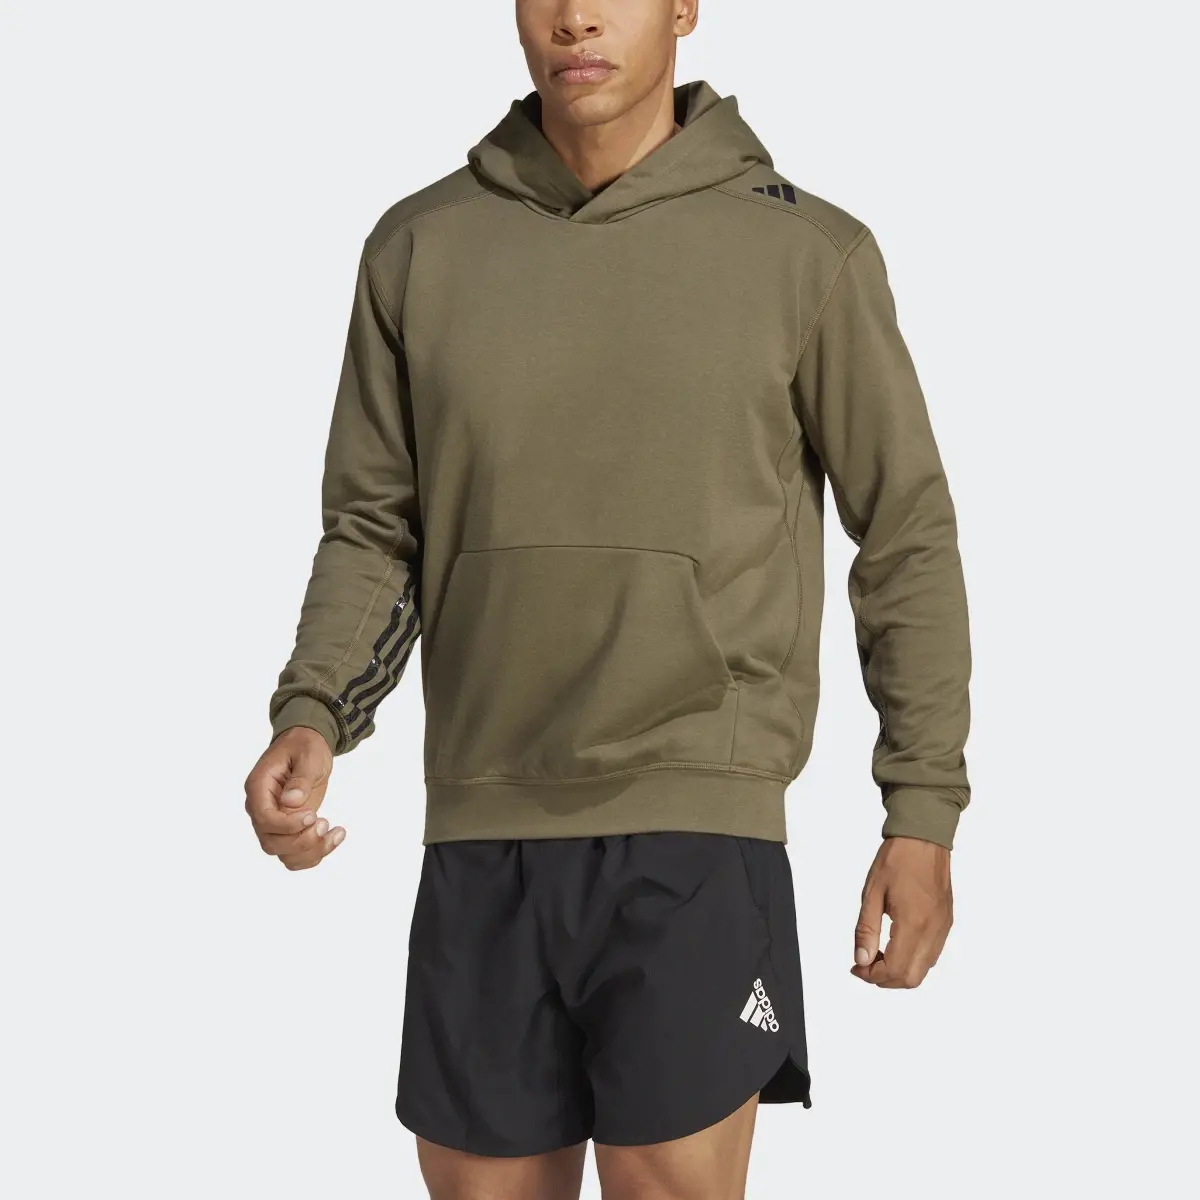 Adidas Sudadera con capucha HIIT Curated By Cody Rigsby. 1